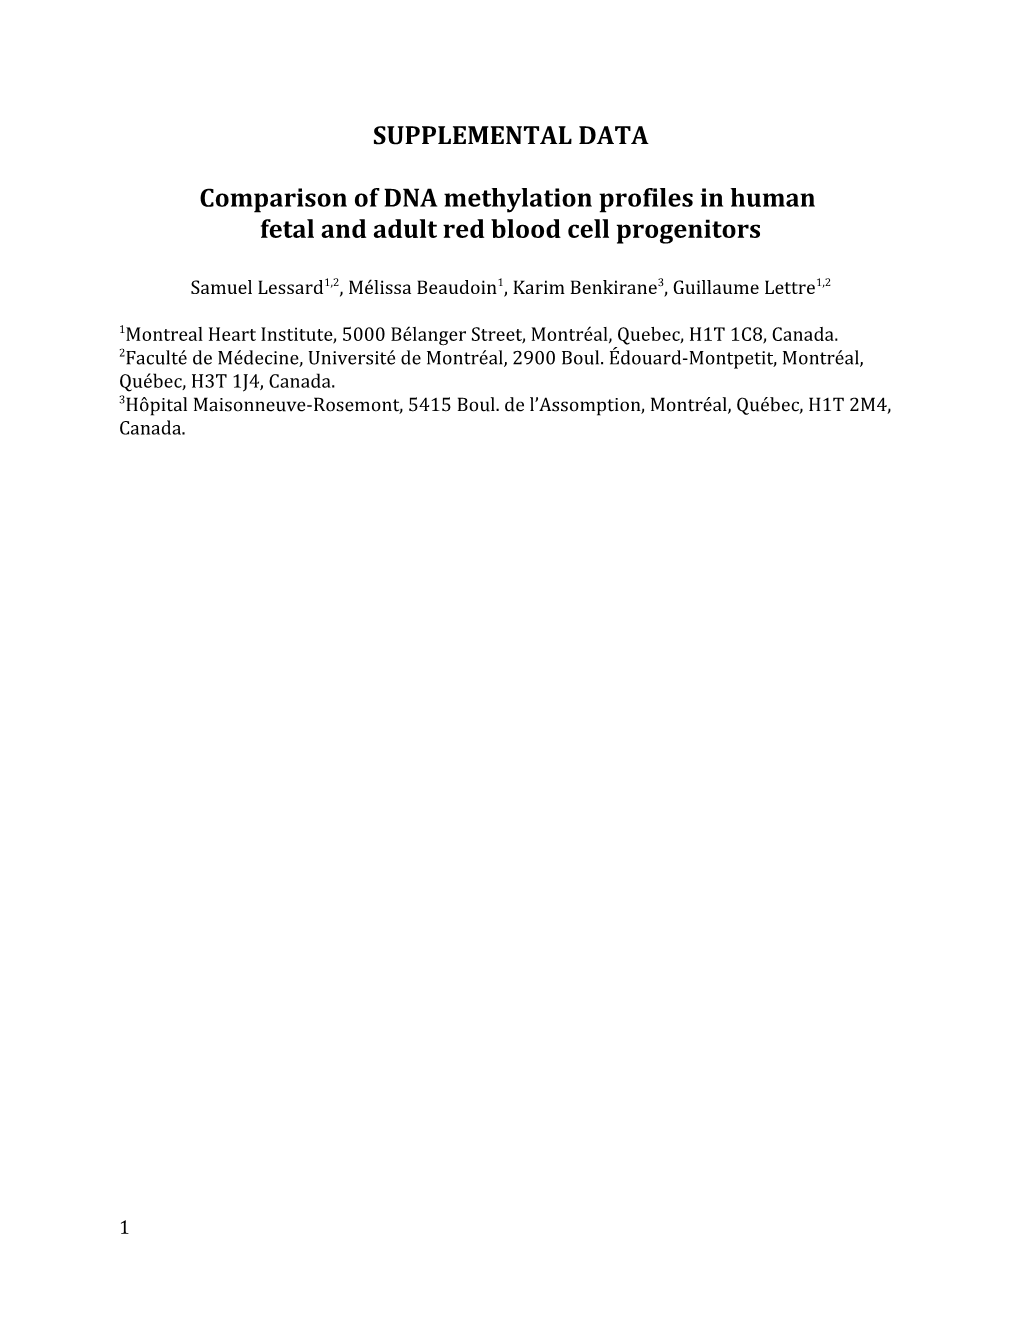 Comparison of DNA Methylation Profiles in Human